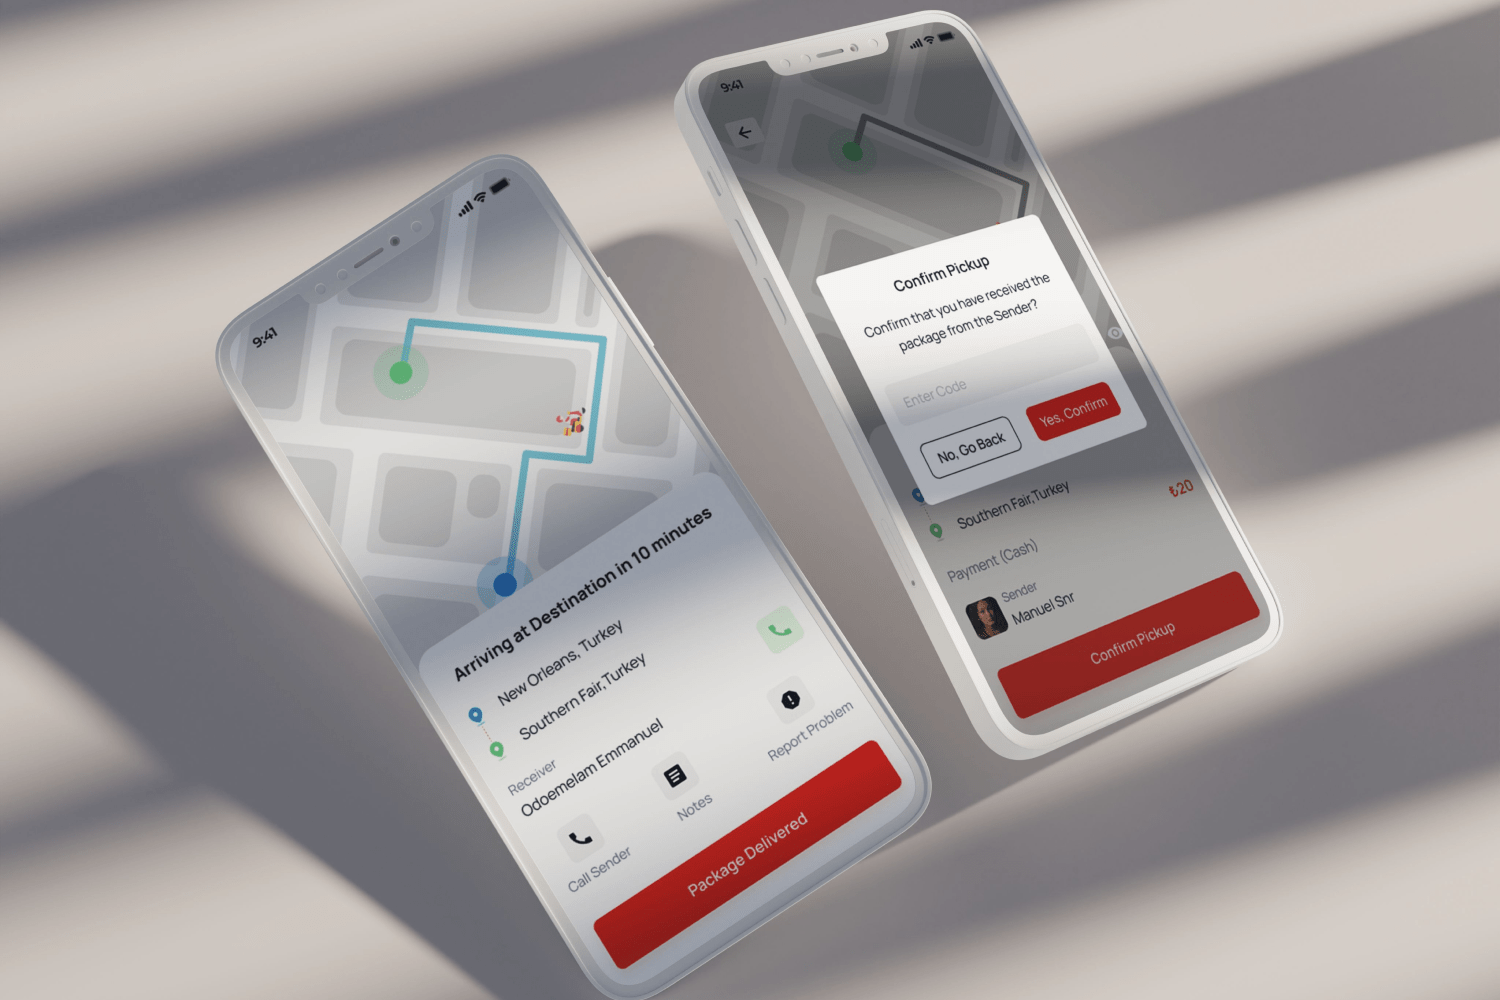 Rider journey screens. Here the security of the delivered product is prioritised.